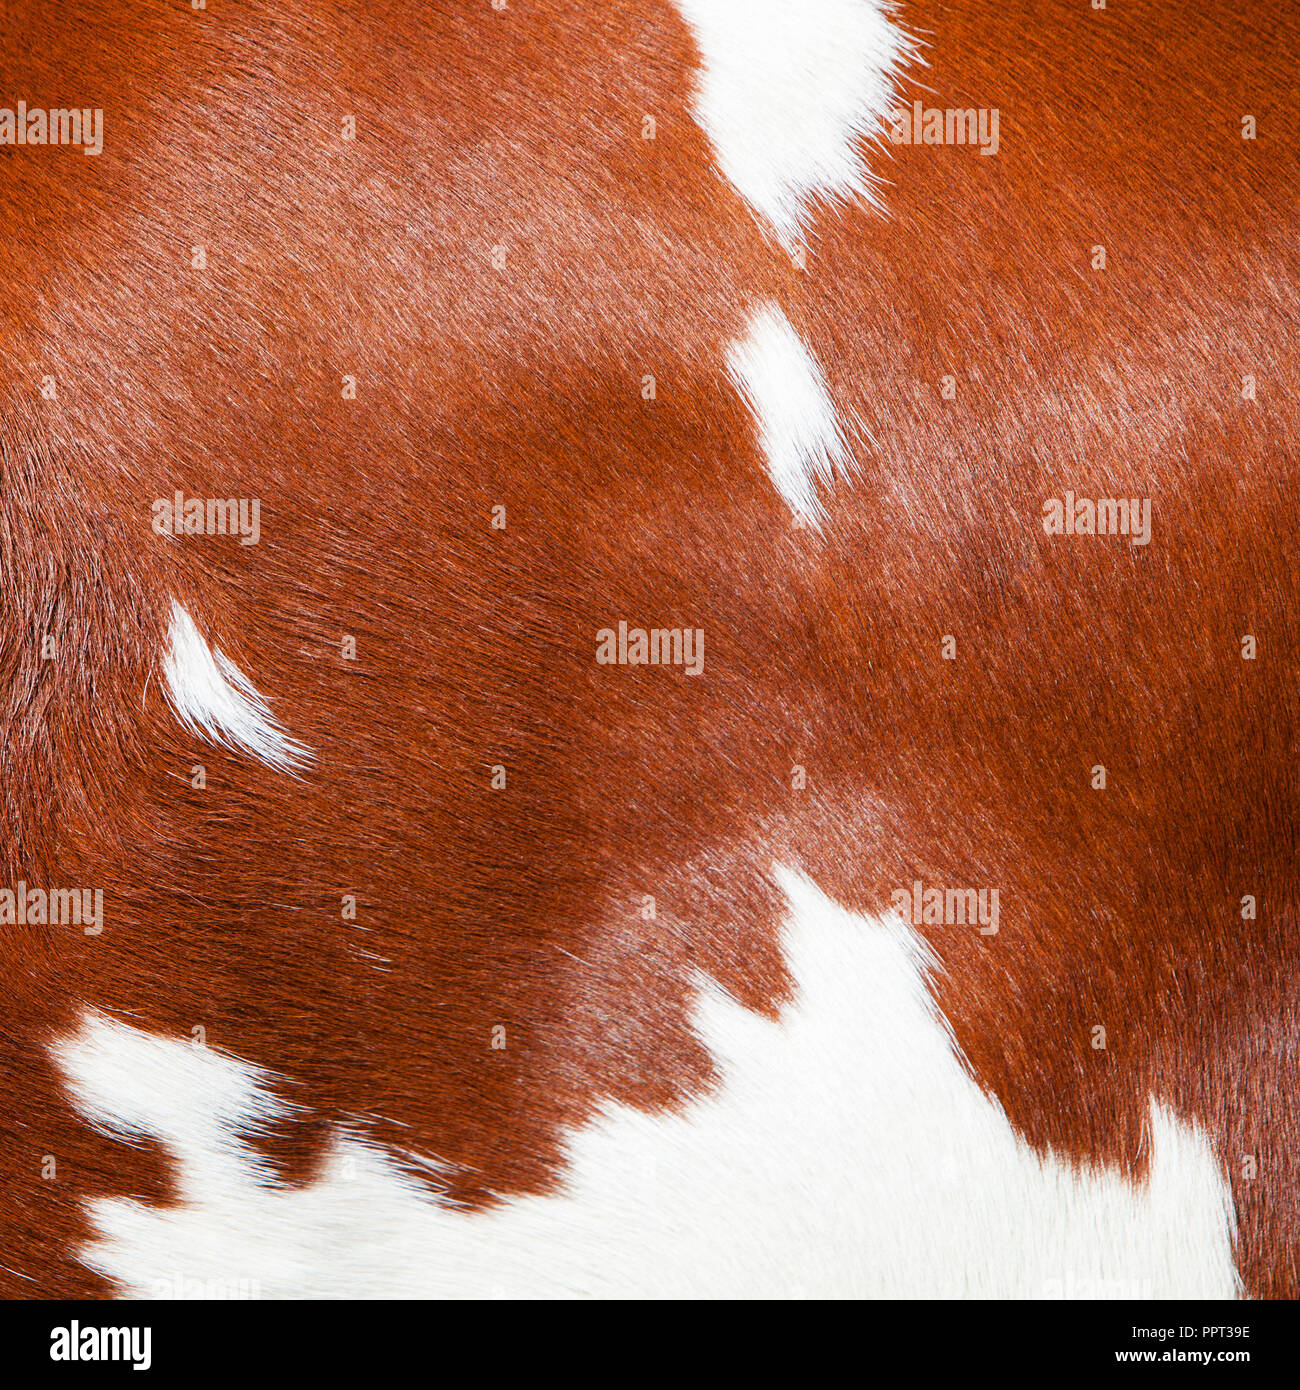 red and white part of hide on side of spotted cow Stock Photo